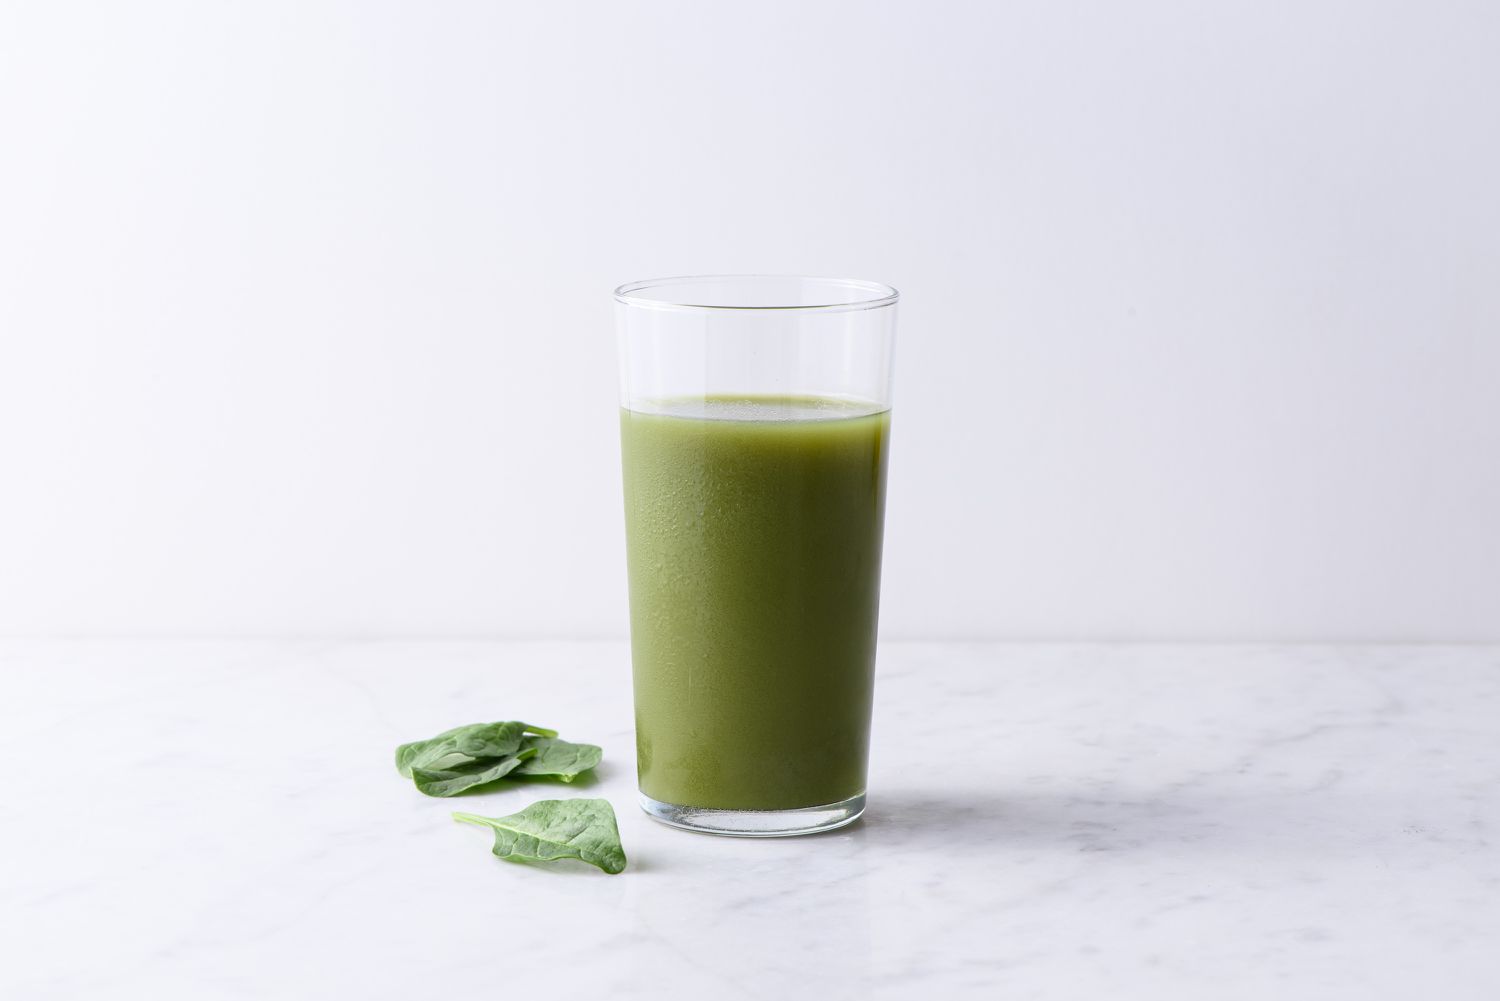 Glass of green juice displayed on a white surface